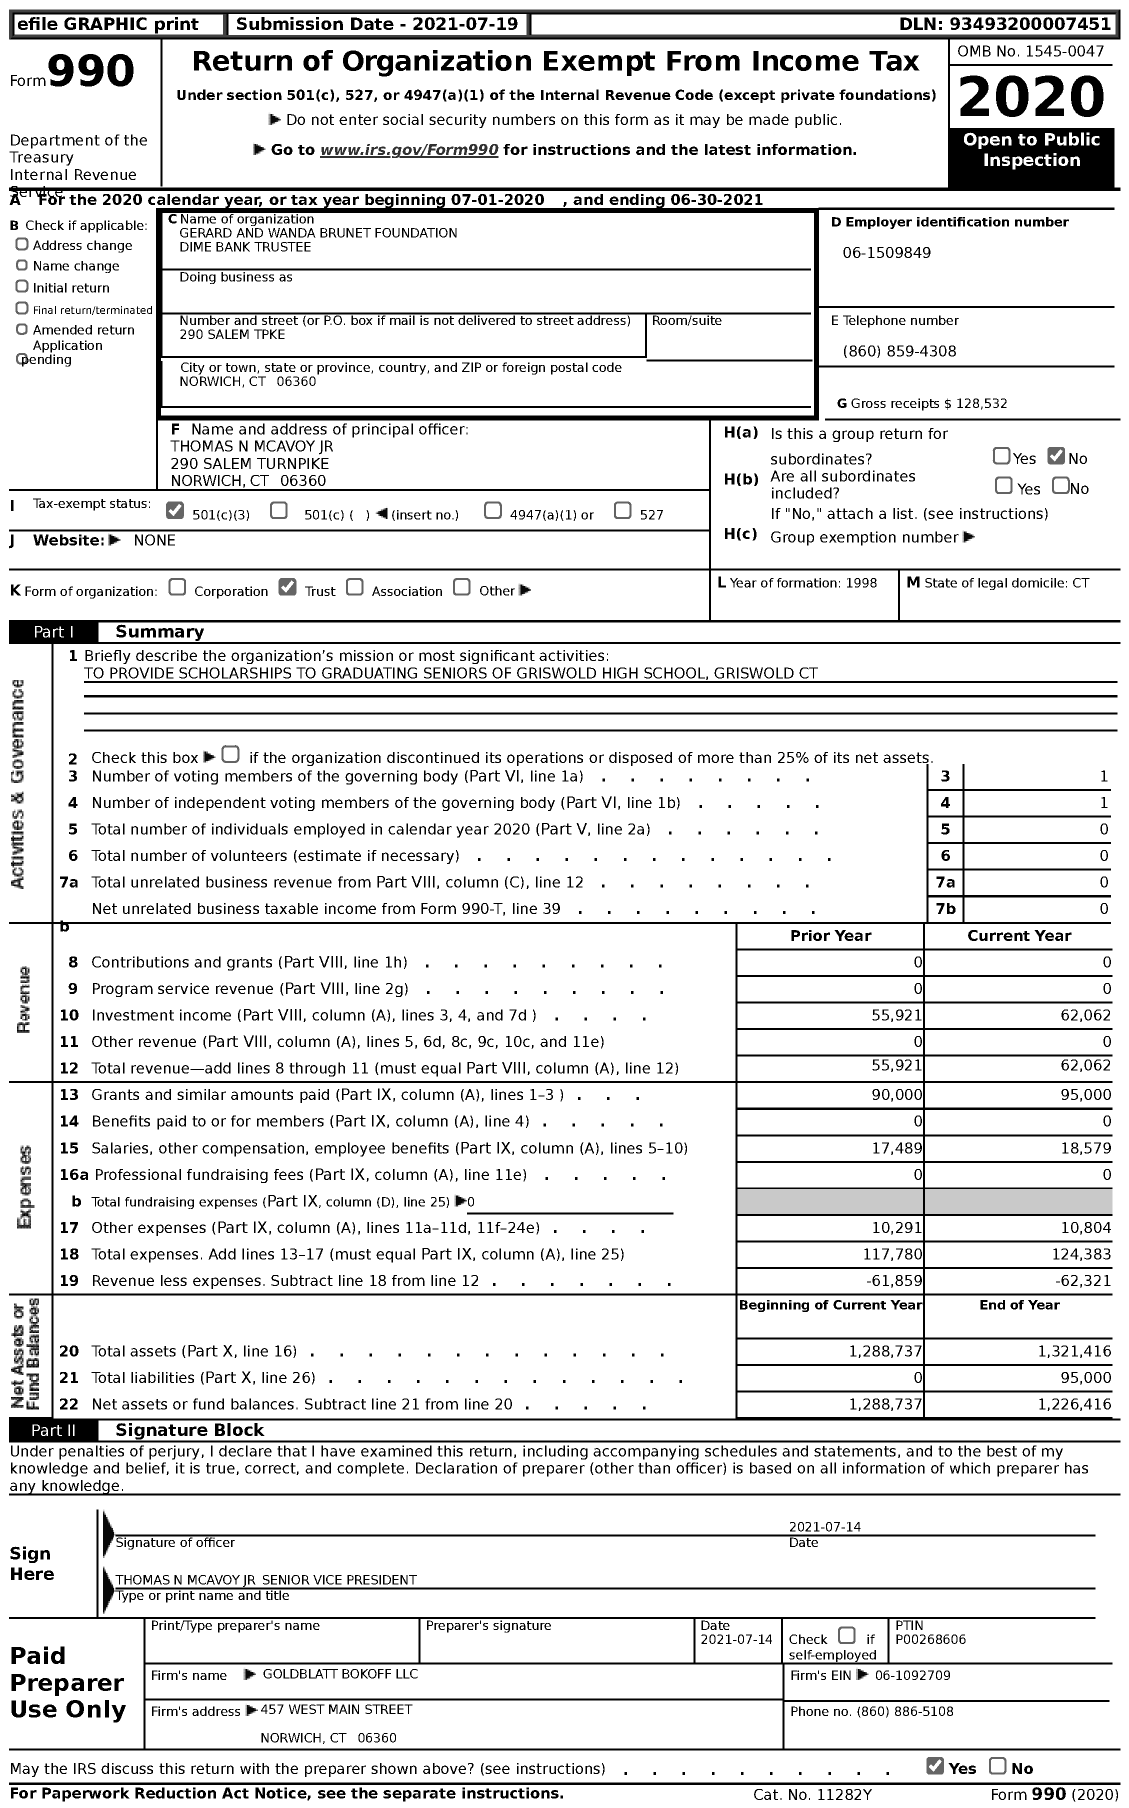 Image of first page of 2020 Form 990 for Gerard and Wanda Brunet Foundation Dime Bank Trustee